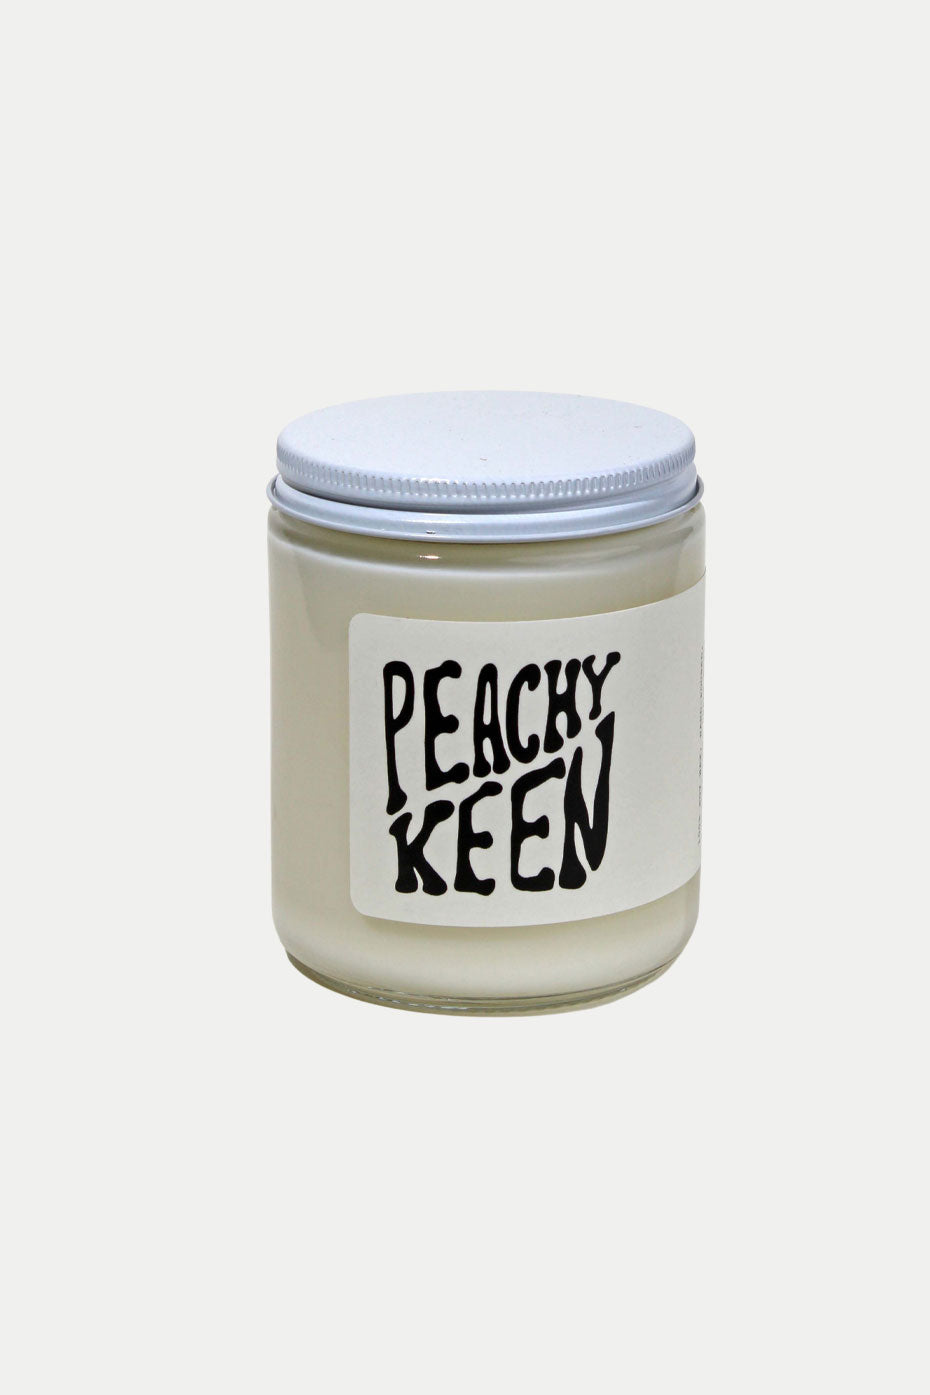 moco-candles-peachy-keen-soy-candle